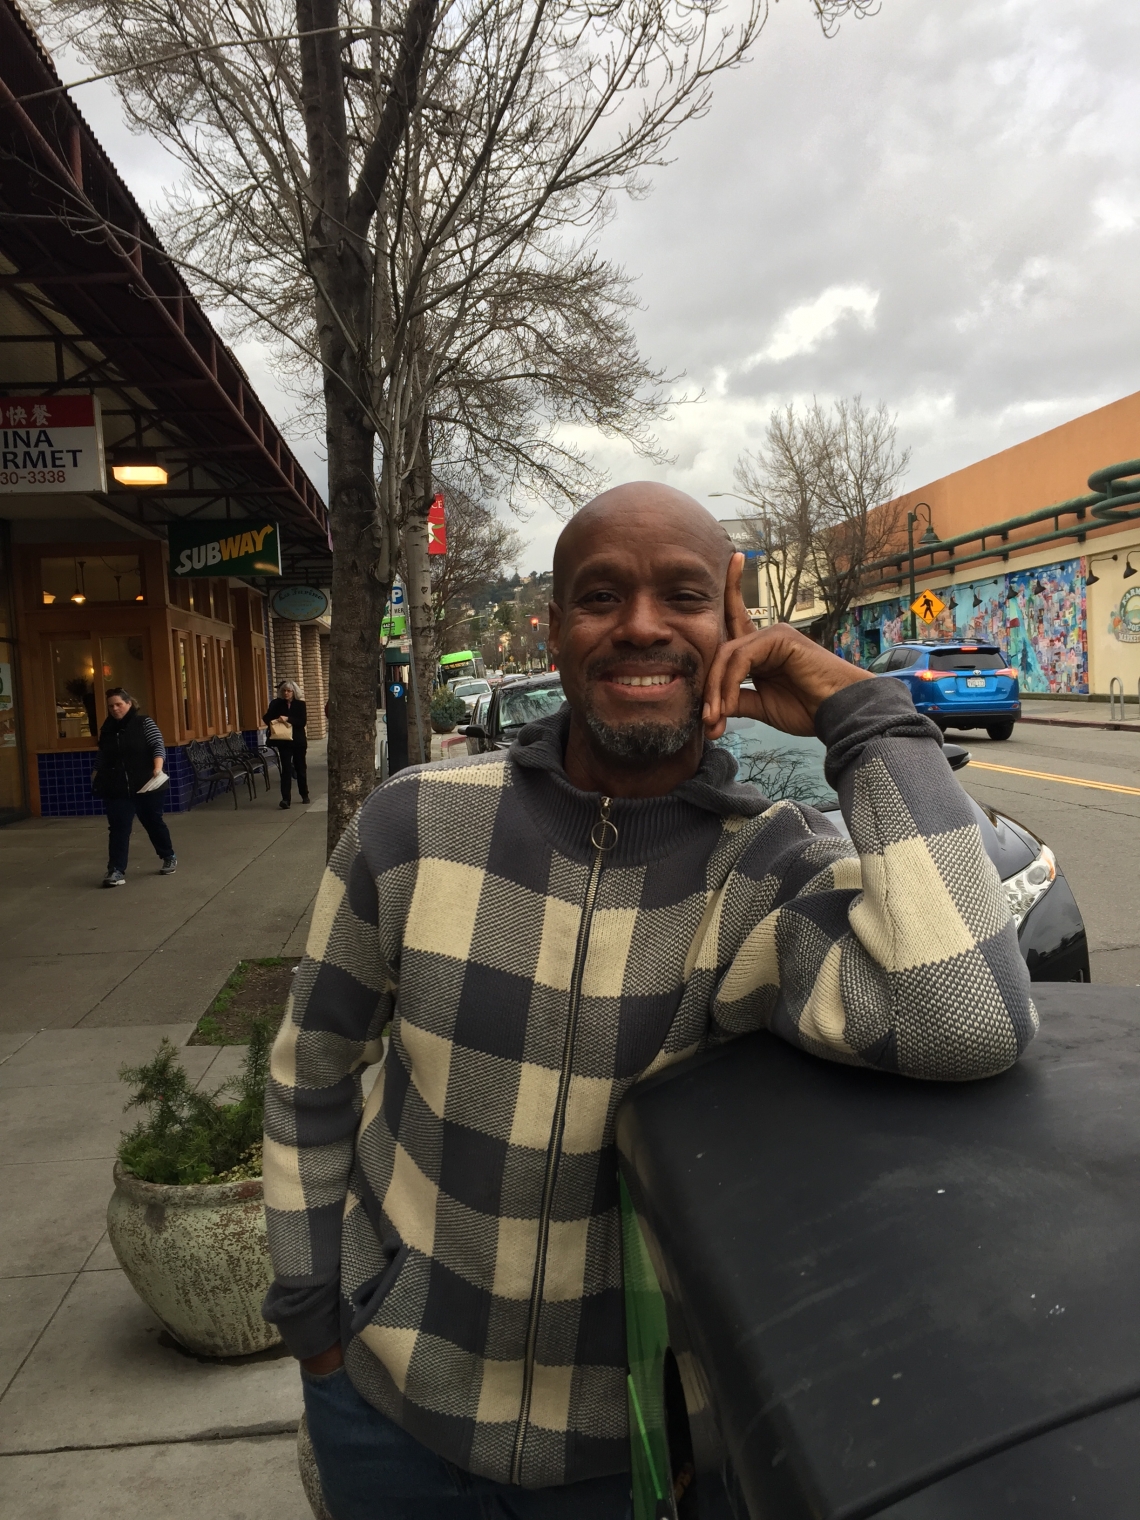 East Bay resident Michael finds inspiration through healthy cooking - and Project Open Hand